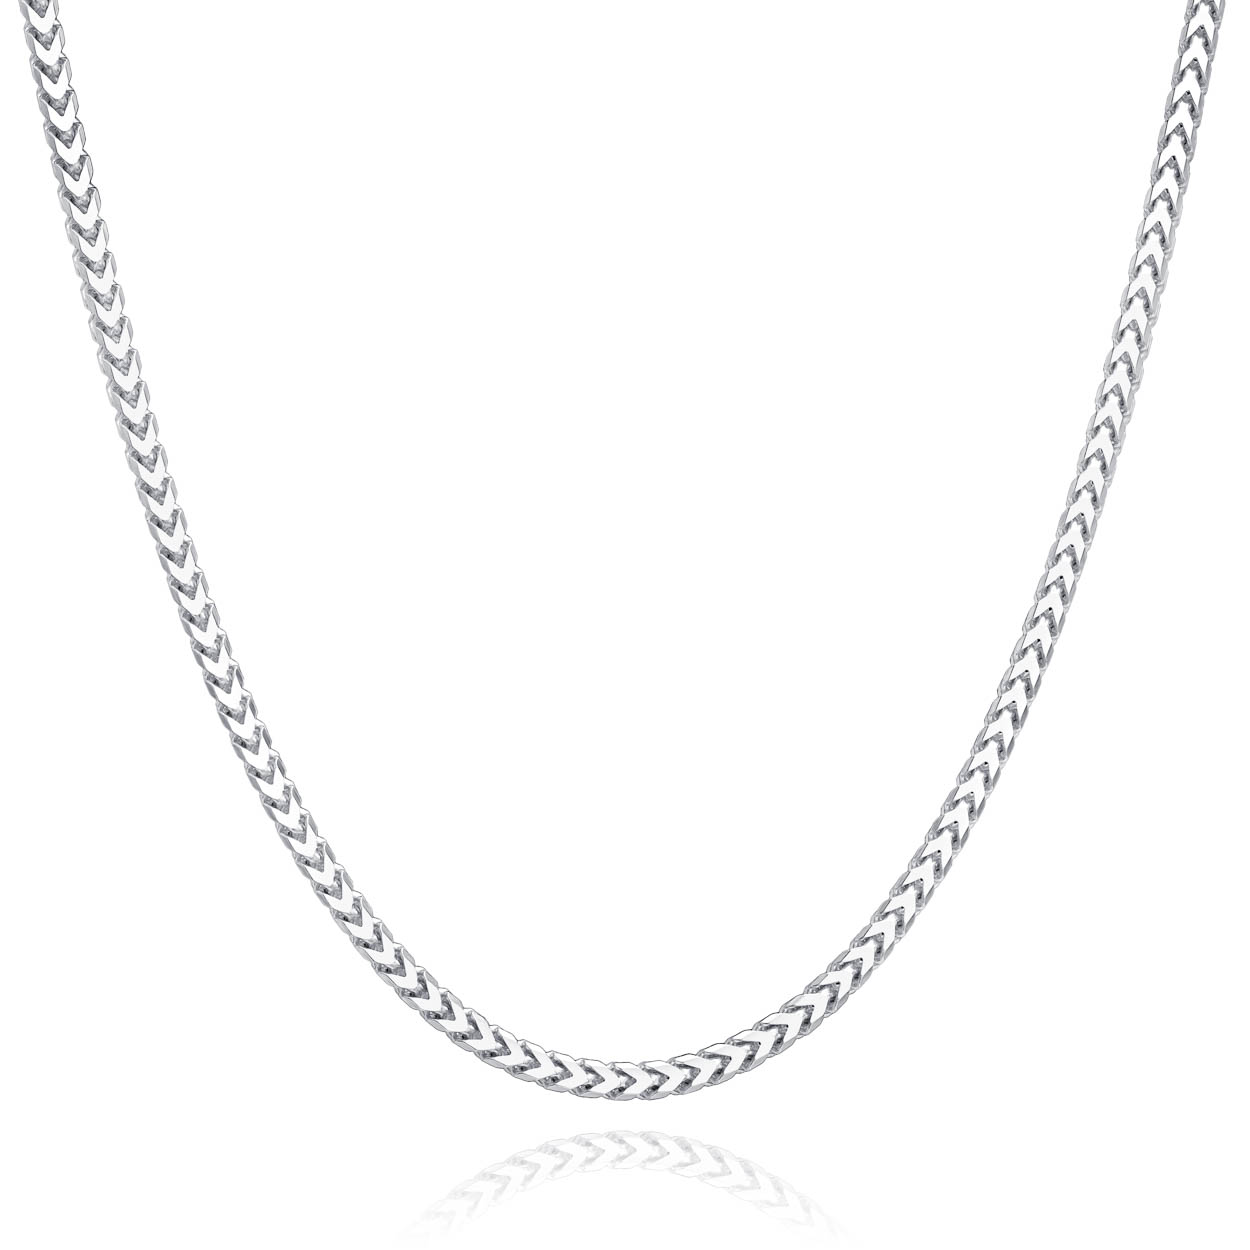 Sterling silver franco chain solid 2.5mm